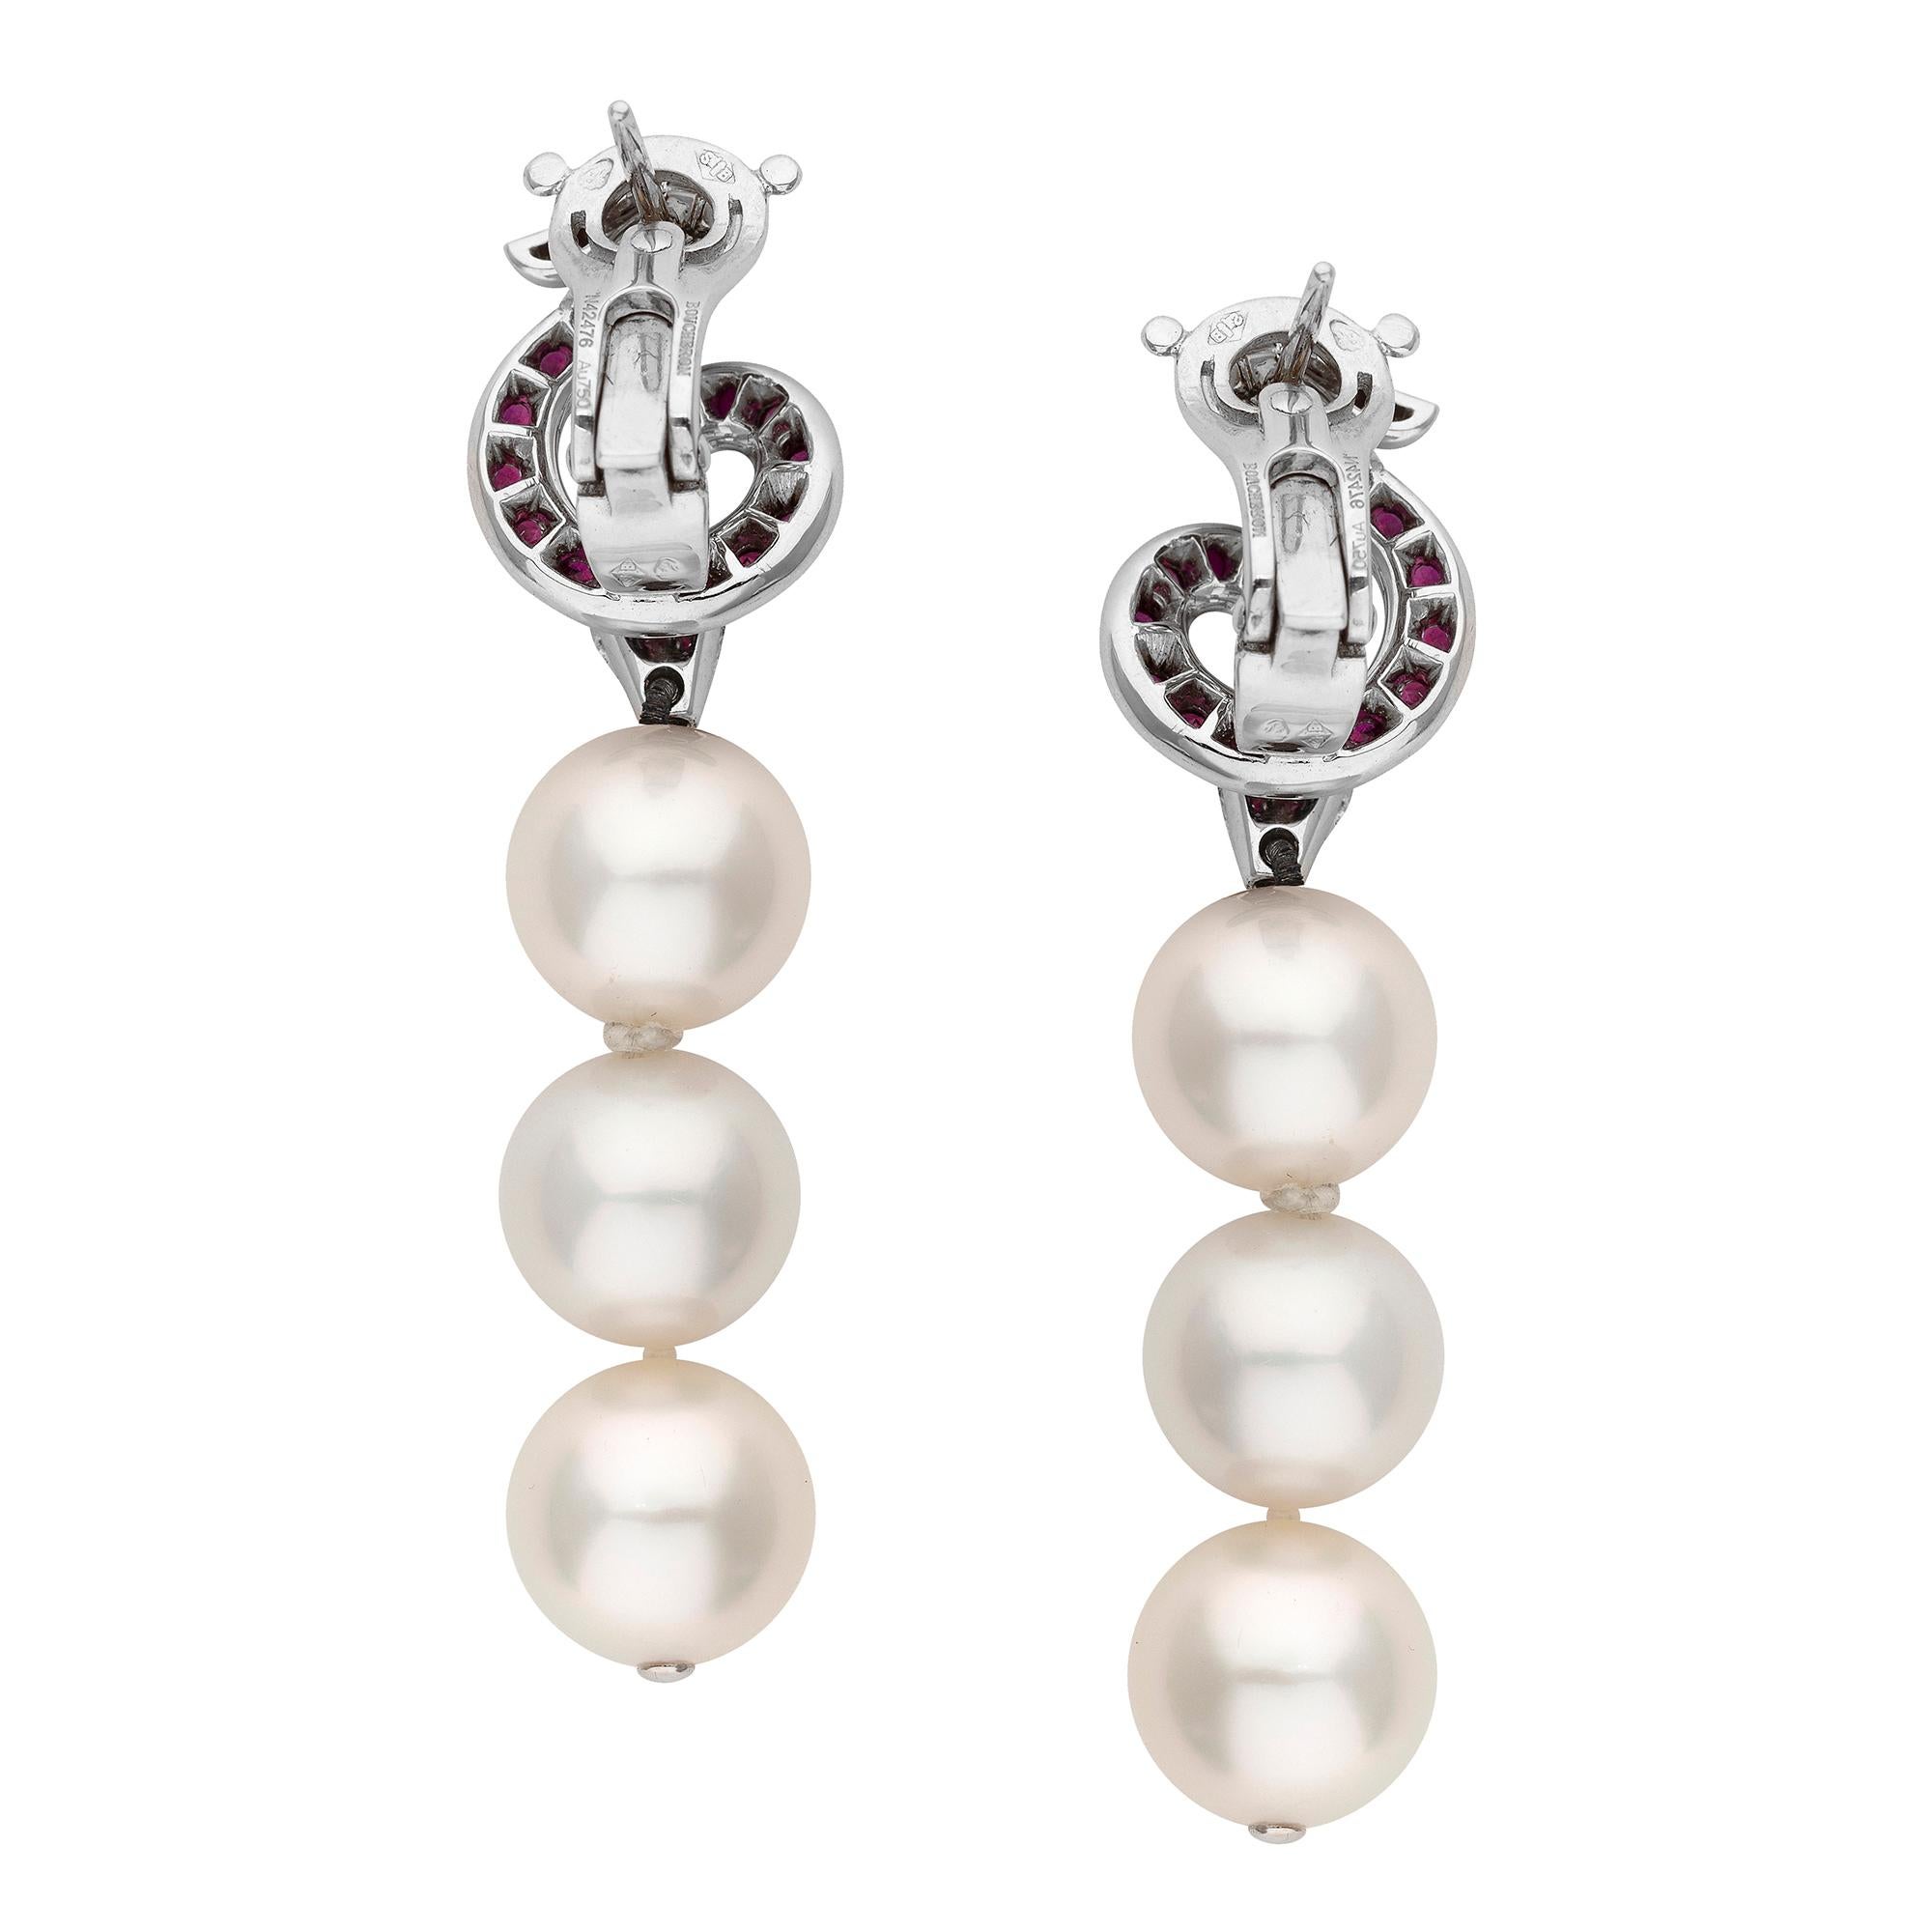 * Rhodium and 18ct white gold base
* Rubies
* High-quality natural pearls
* Fastening for pierced earrings
* Excellent condition
* Boucheron markings present
